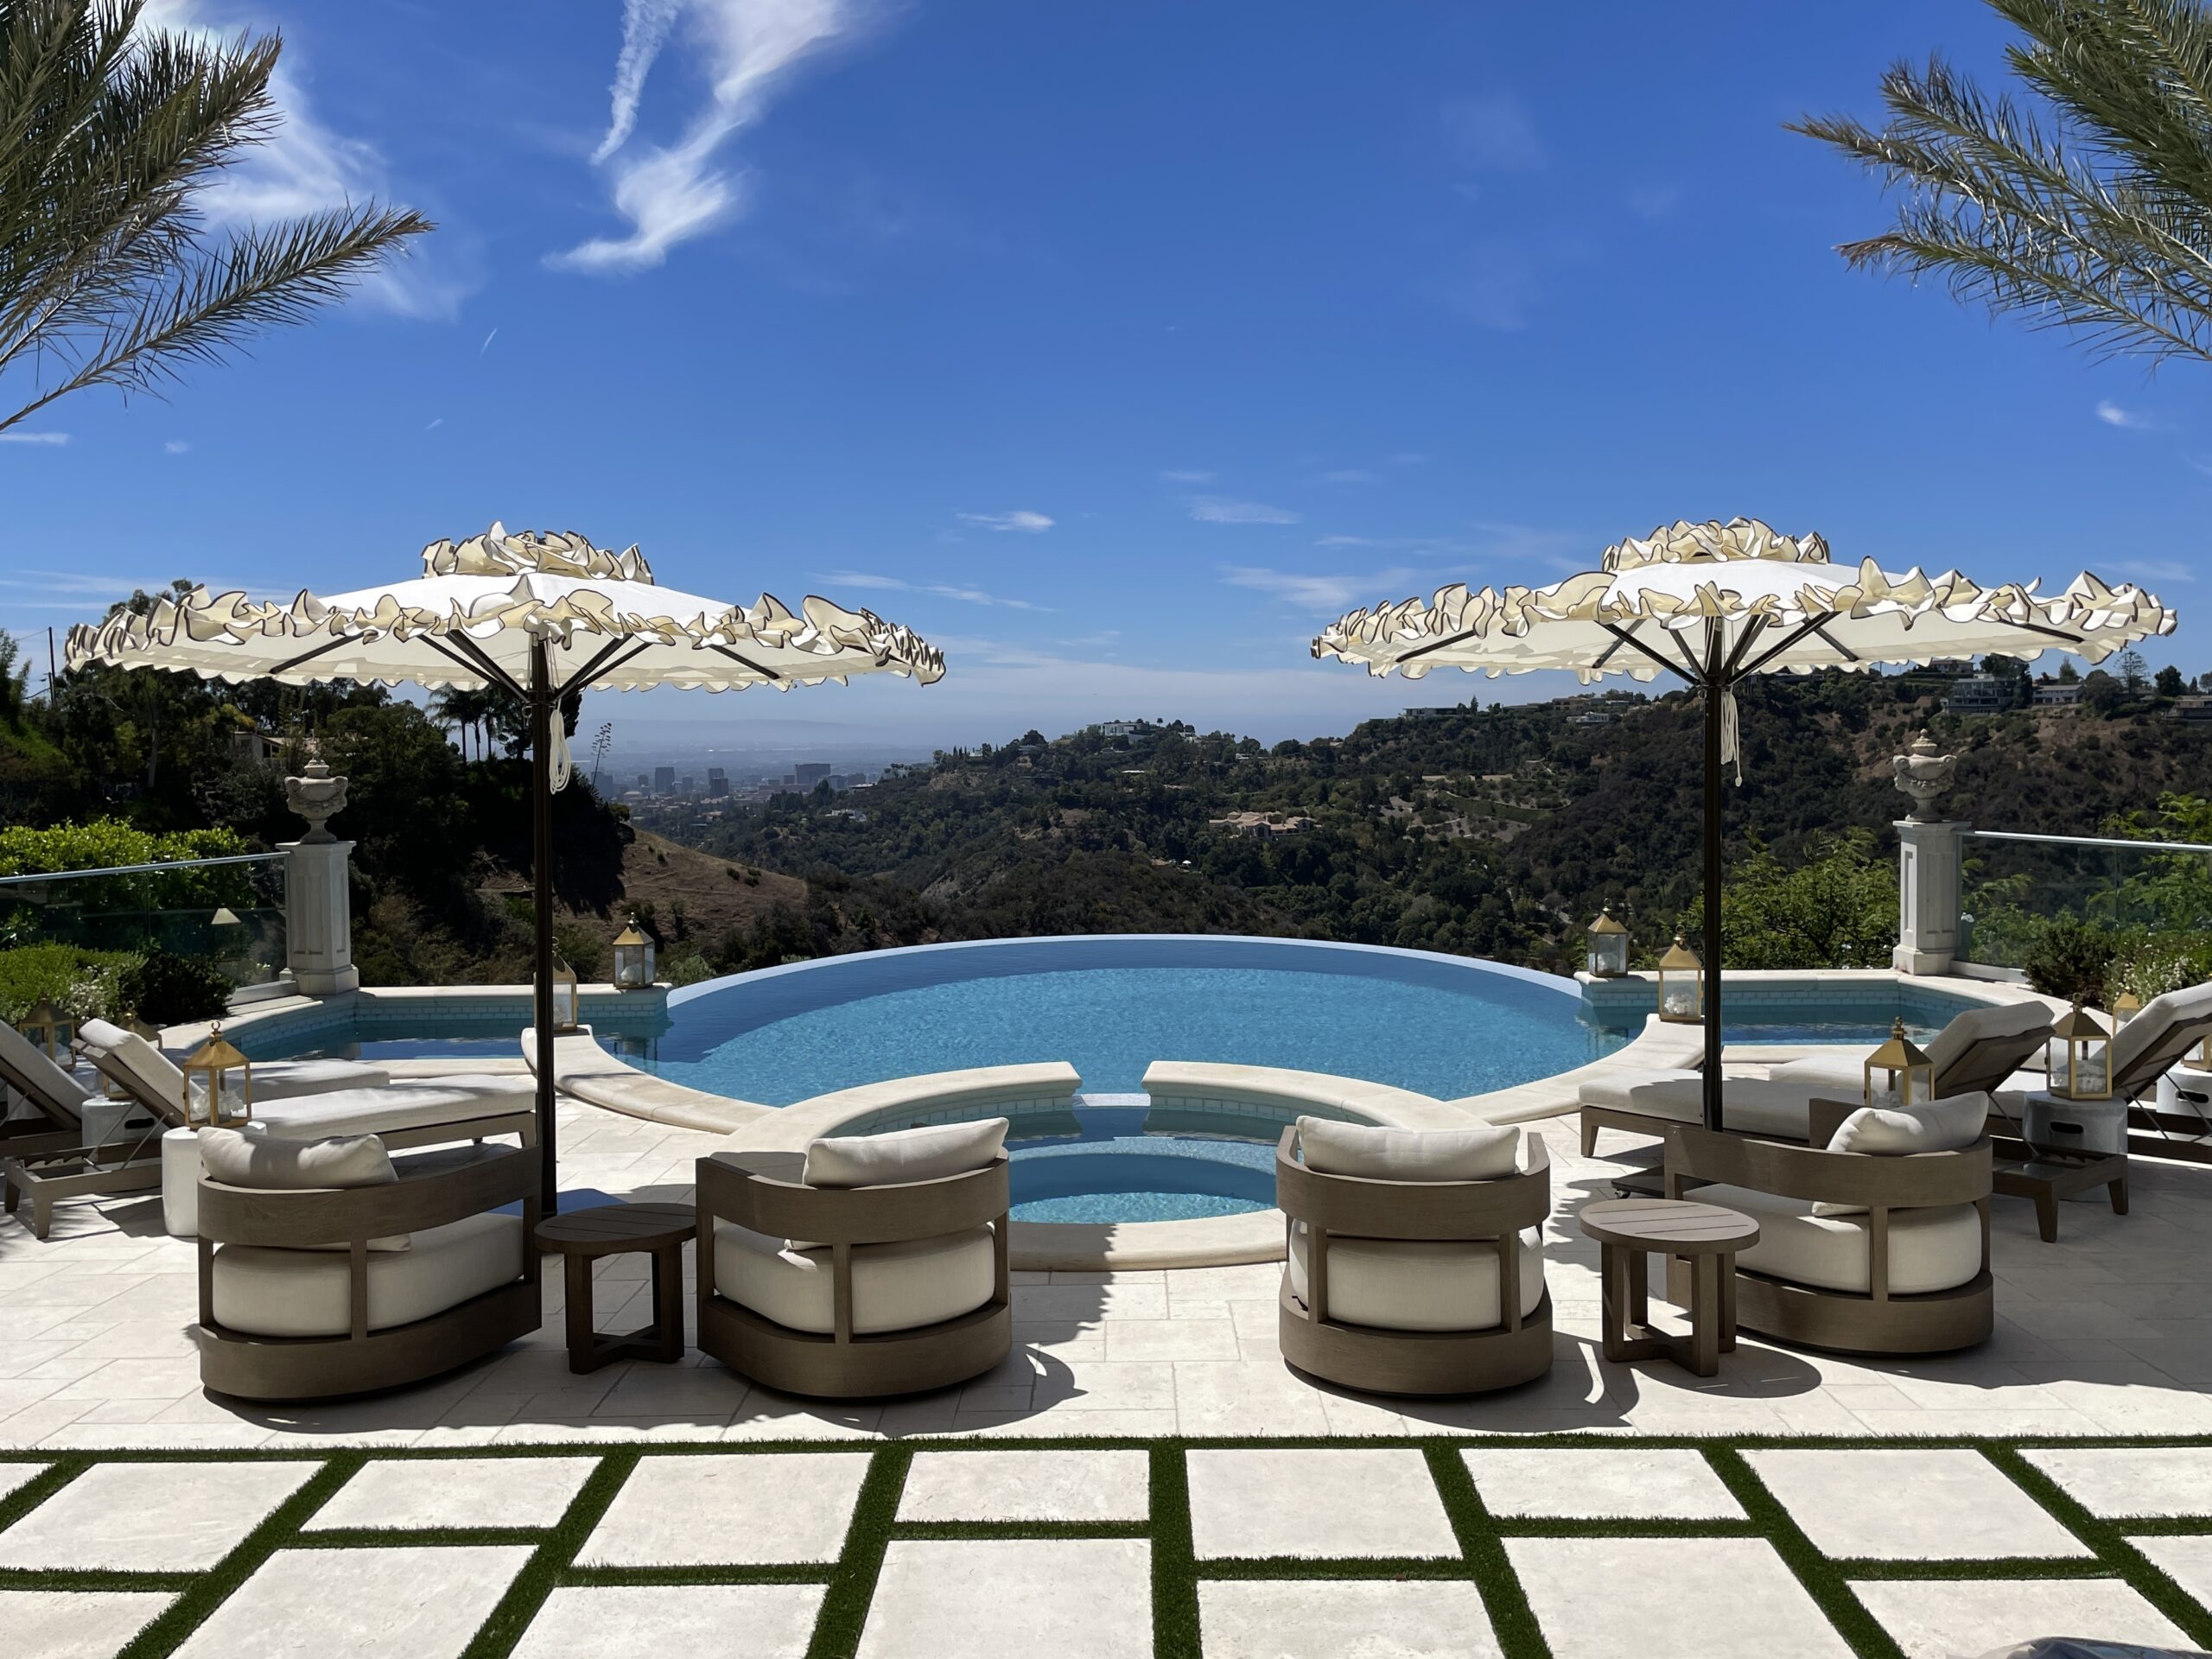 Image of umbrellas and furniture poolside